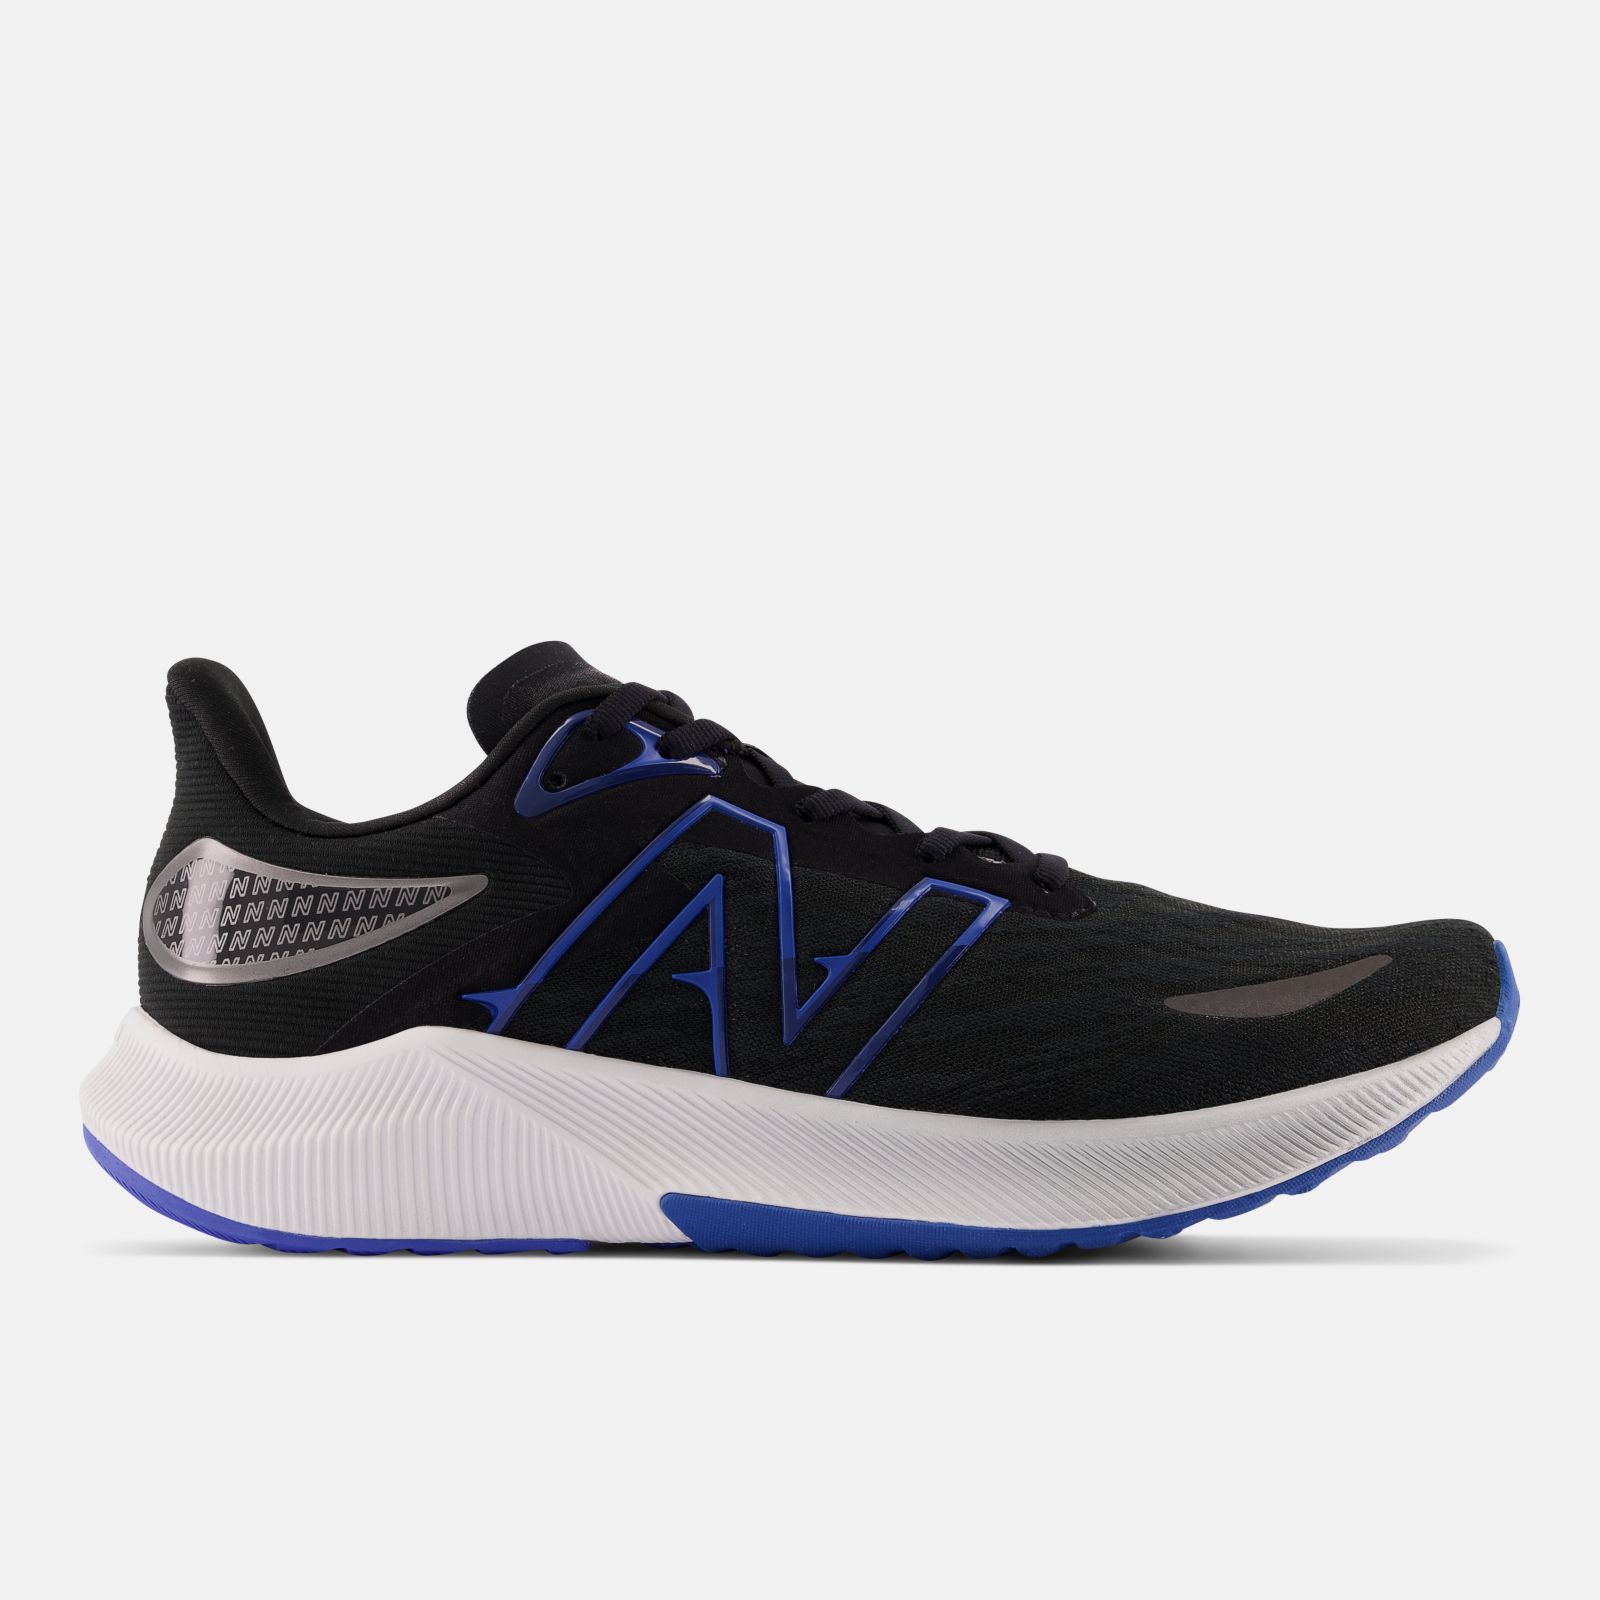 New Balance FuelCell Propel v3, Black / Navy, swatch